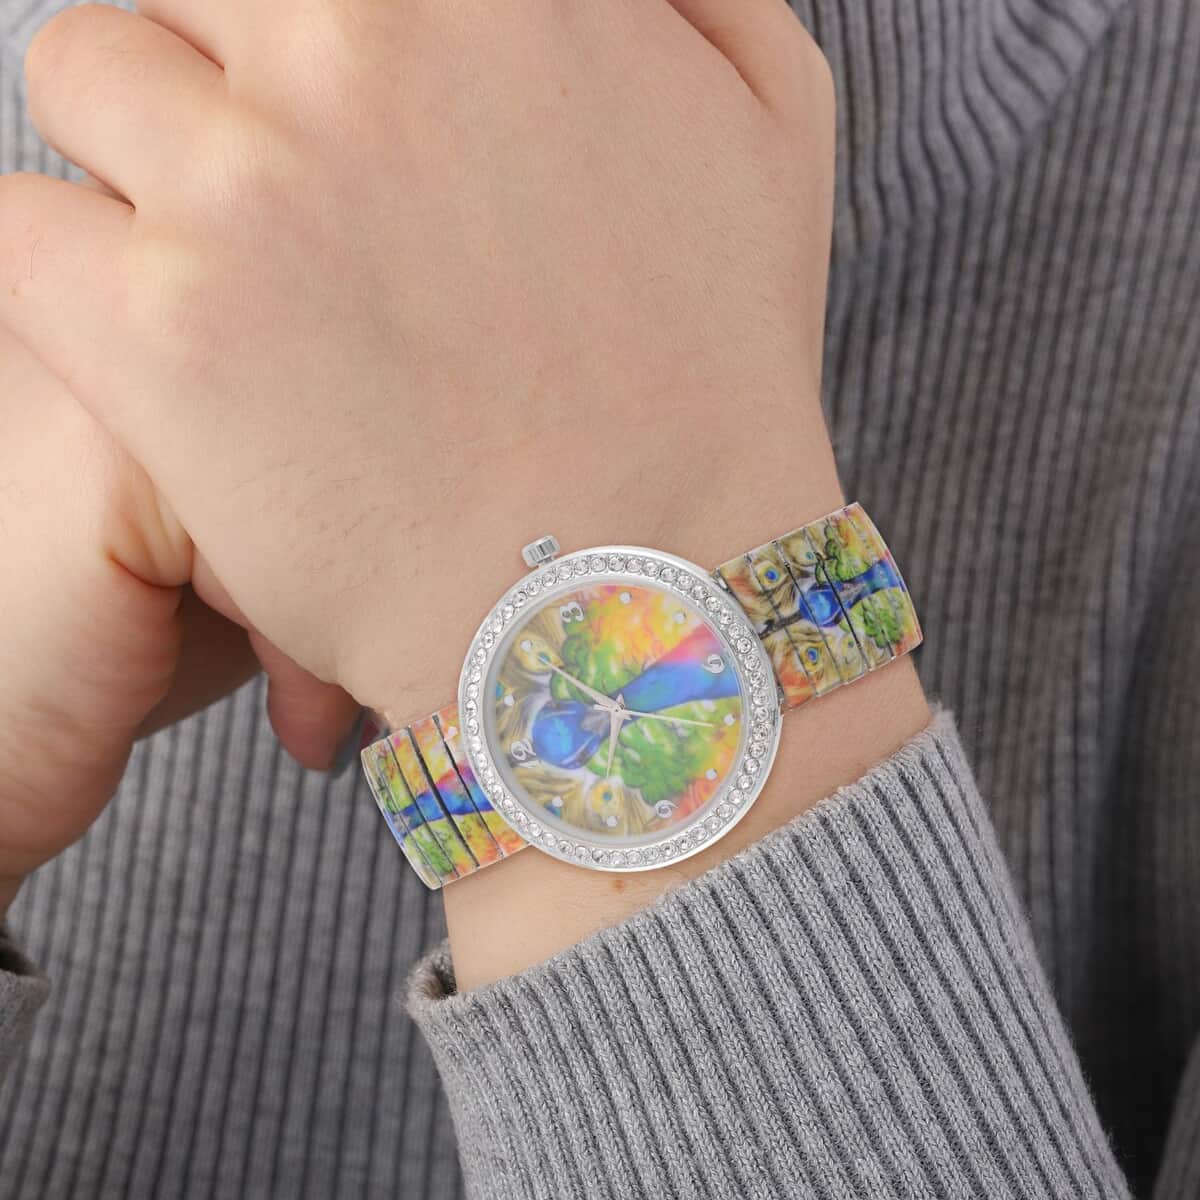 Strada Japanese Movement Bracelet Watch in Stainless Steel, Stretchable Watch with Austrian Crystals and Peacock Pattern (42.40mm) (6.50-7.0 Inches) image number 2